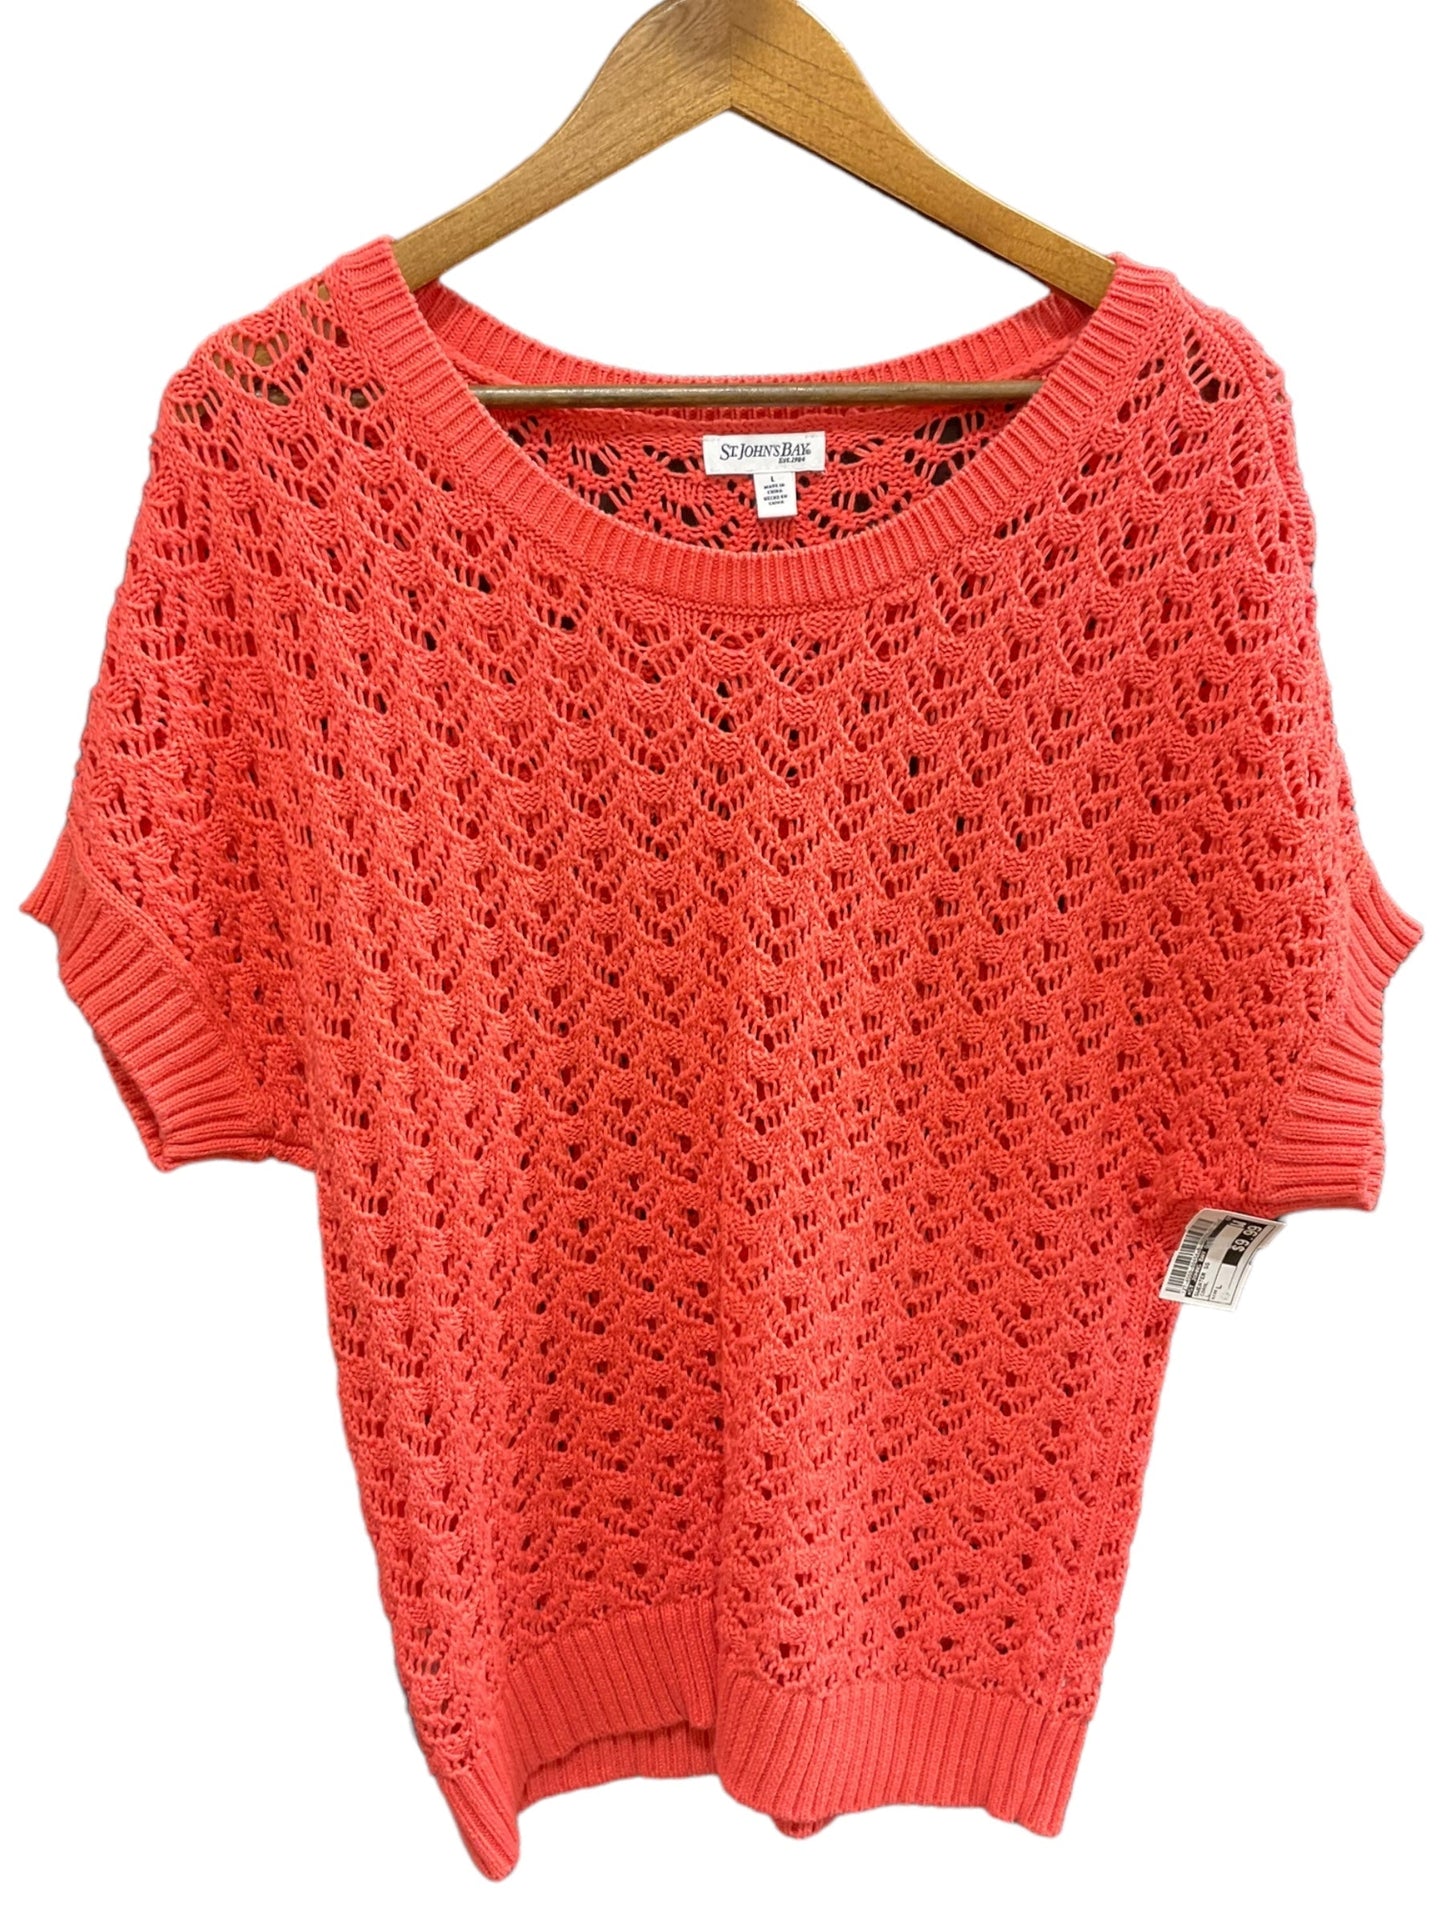 Coral Sweater Short Sleeve St Johns Bay O, Size L